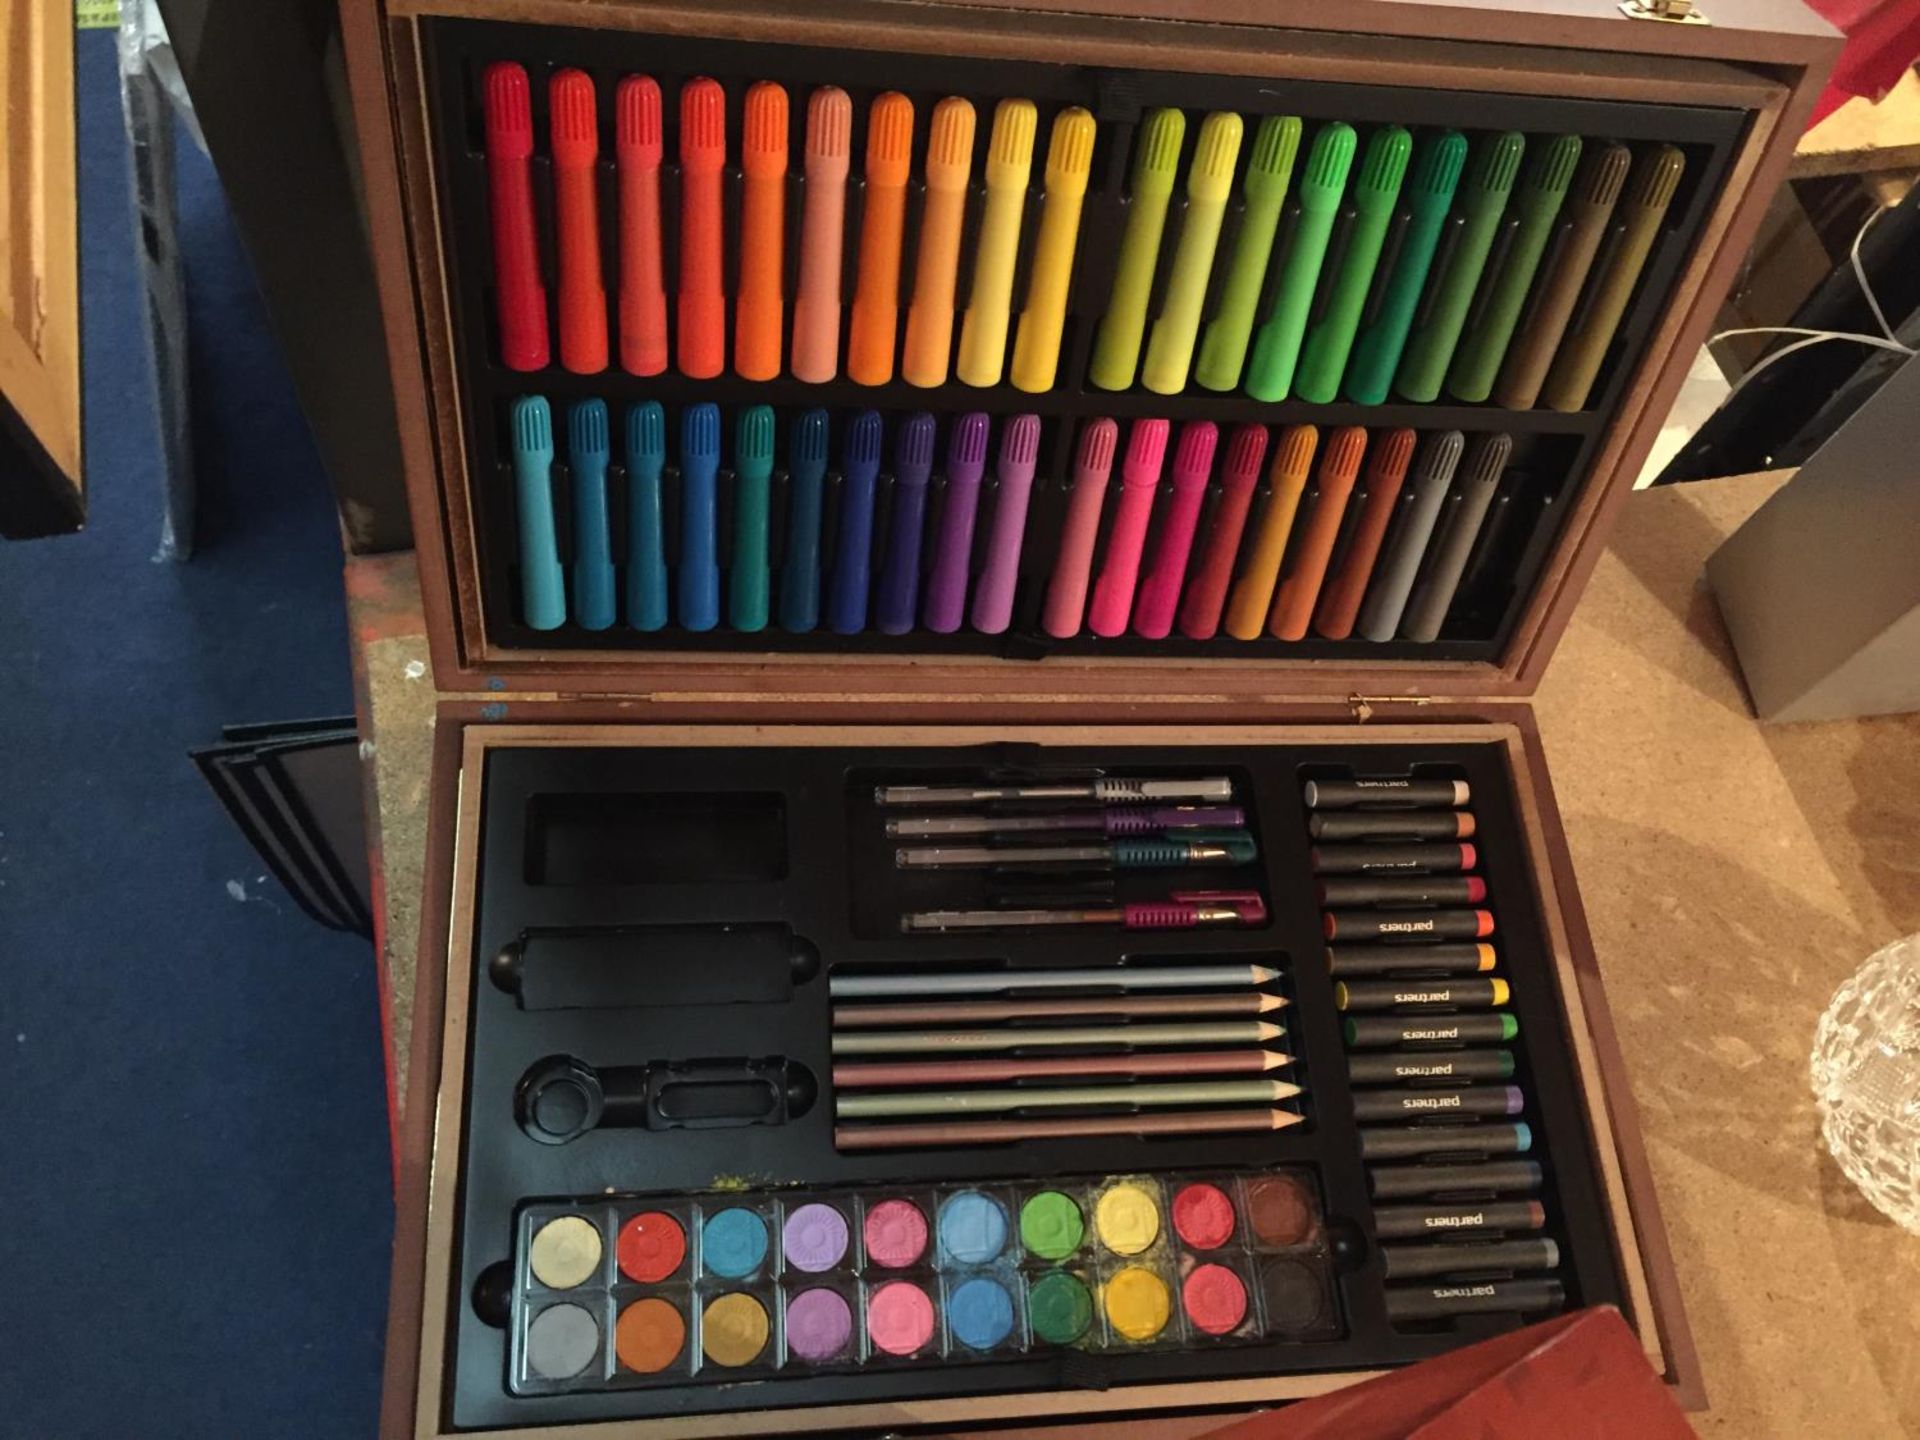 TWO CASES OF ART SUPPLIES TO INCLUDE FELT TIPS, PENCILS, OIL PAINTS ETC - Image 6 of 12